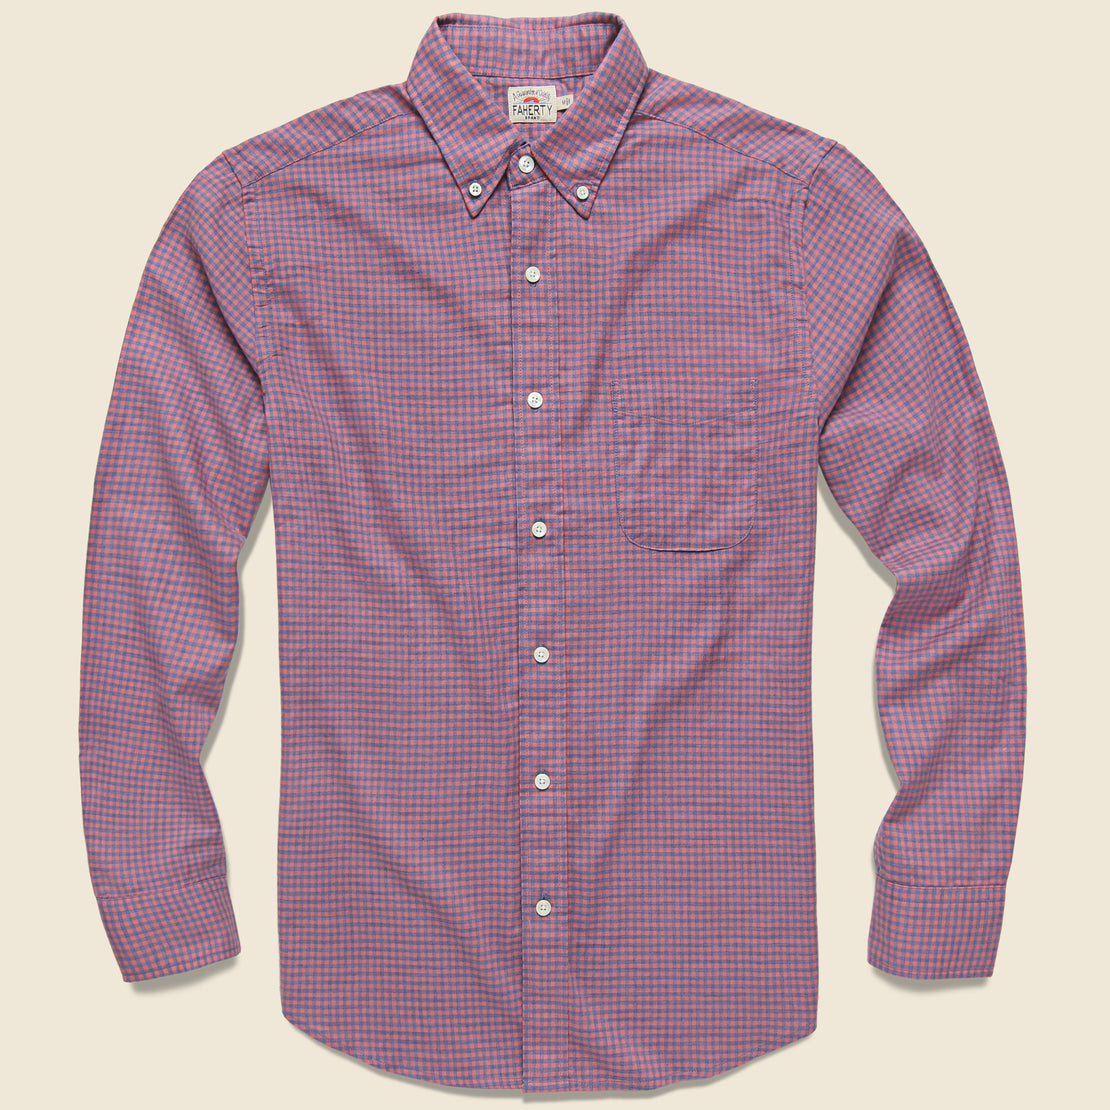 Faherty Pacific Shirt - Rose Blue Gingham